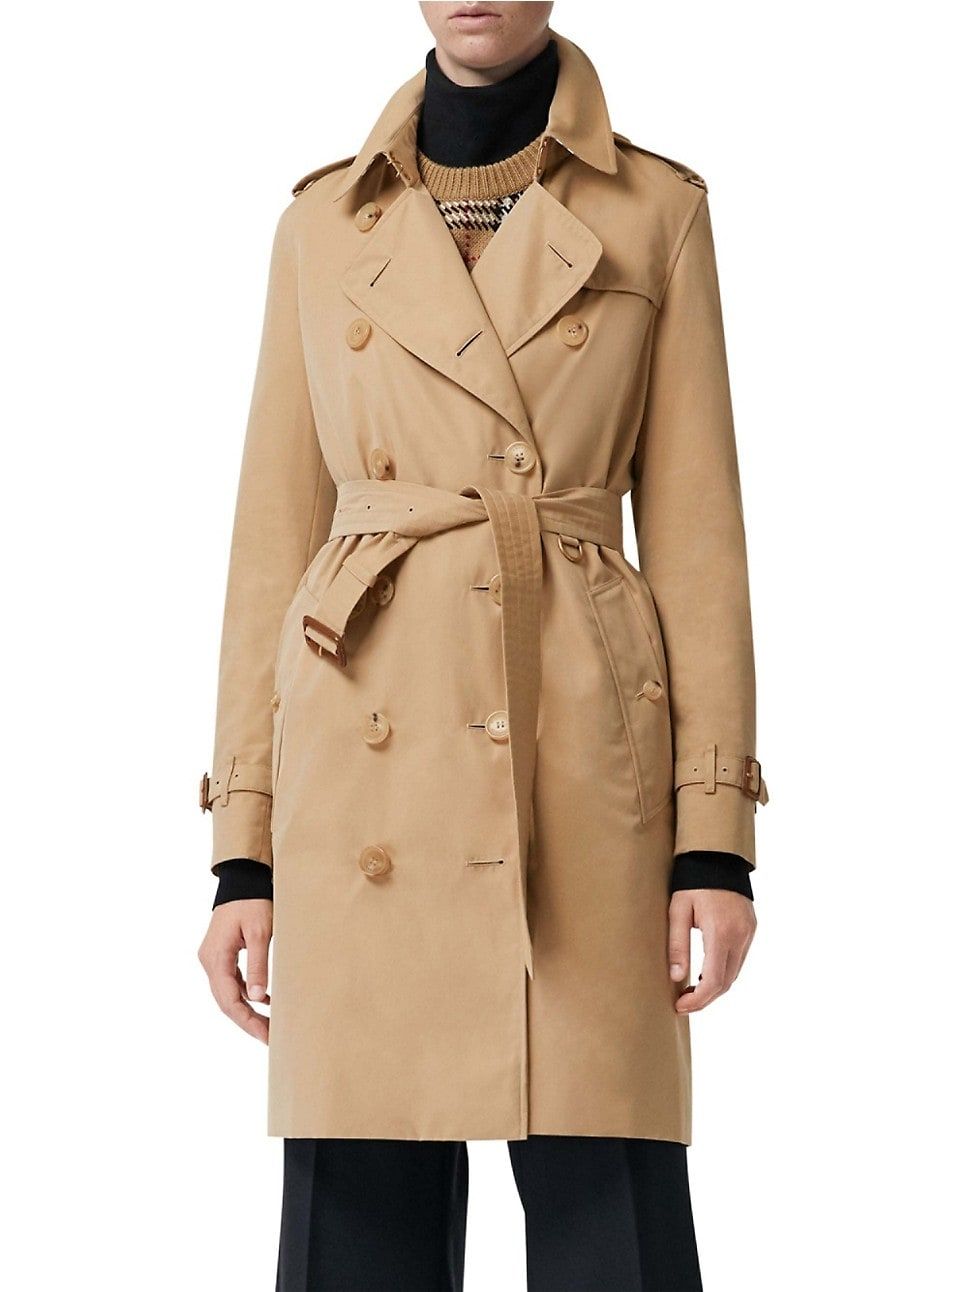 Kensington Belted Double-Breasted Trench Coat | Saks Fifth Avenue